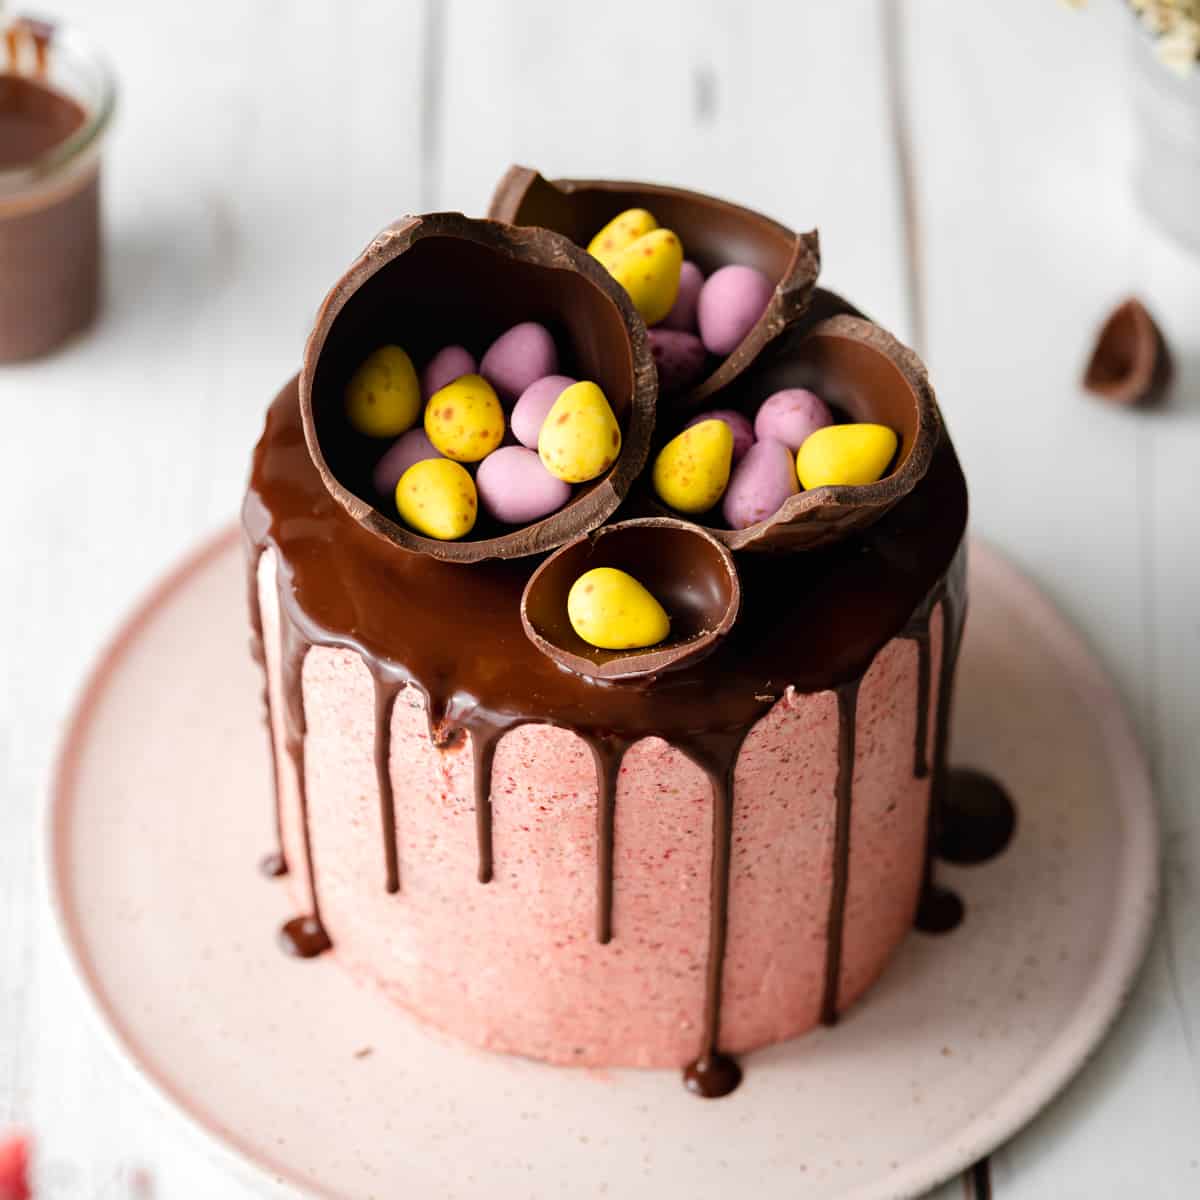 Keto Easter Egg Cake - All Day I Dream About Food